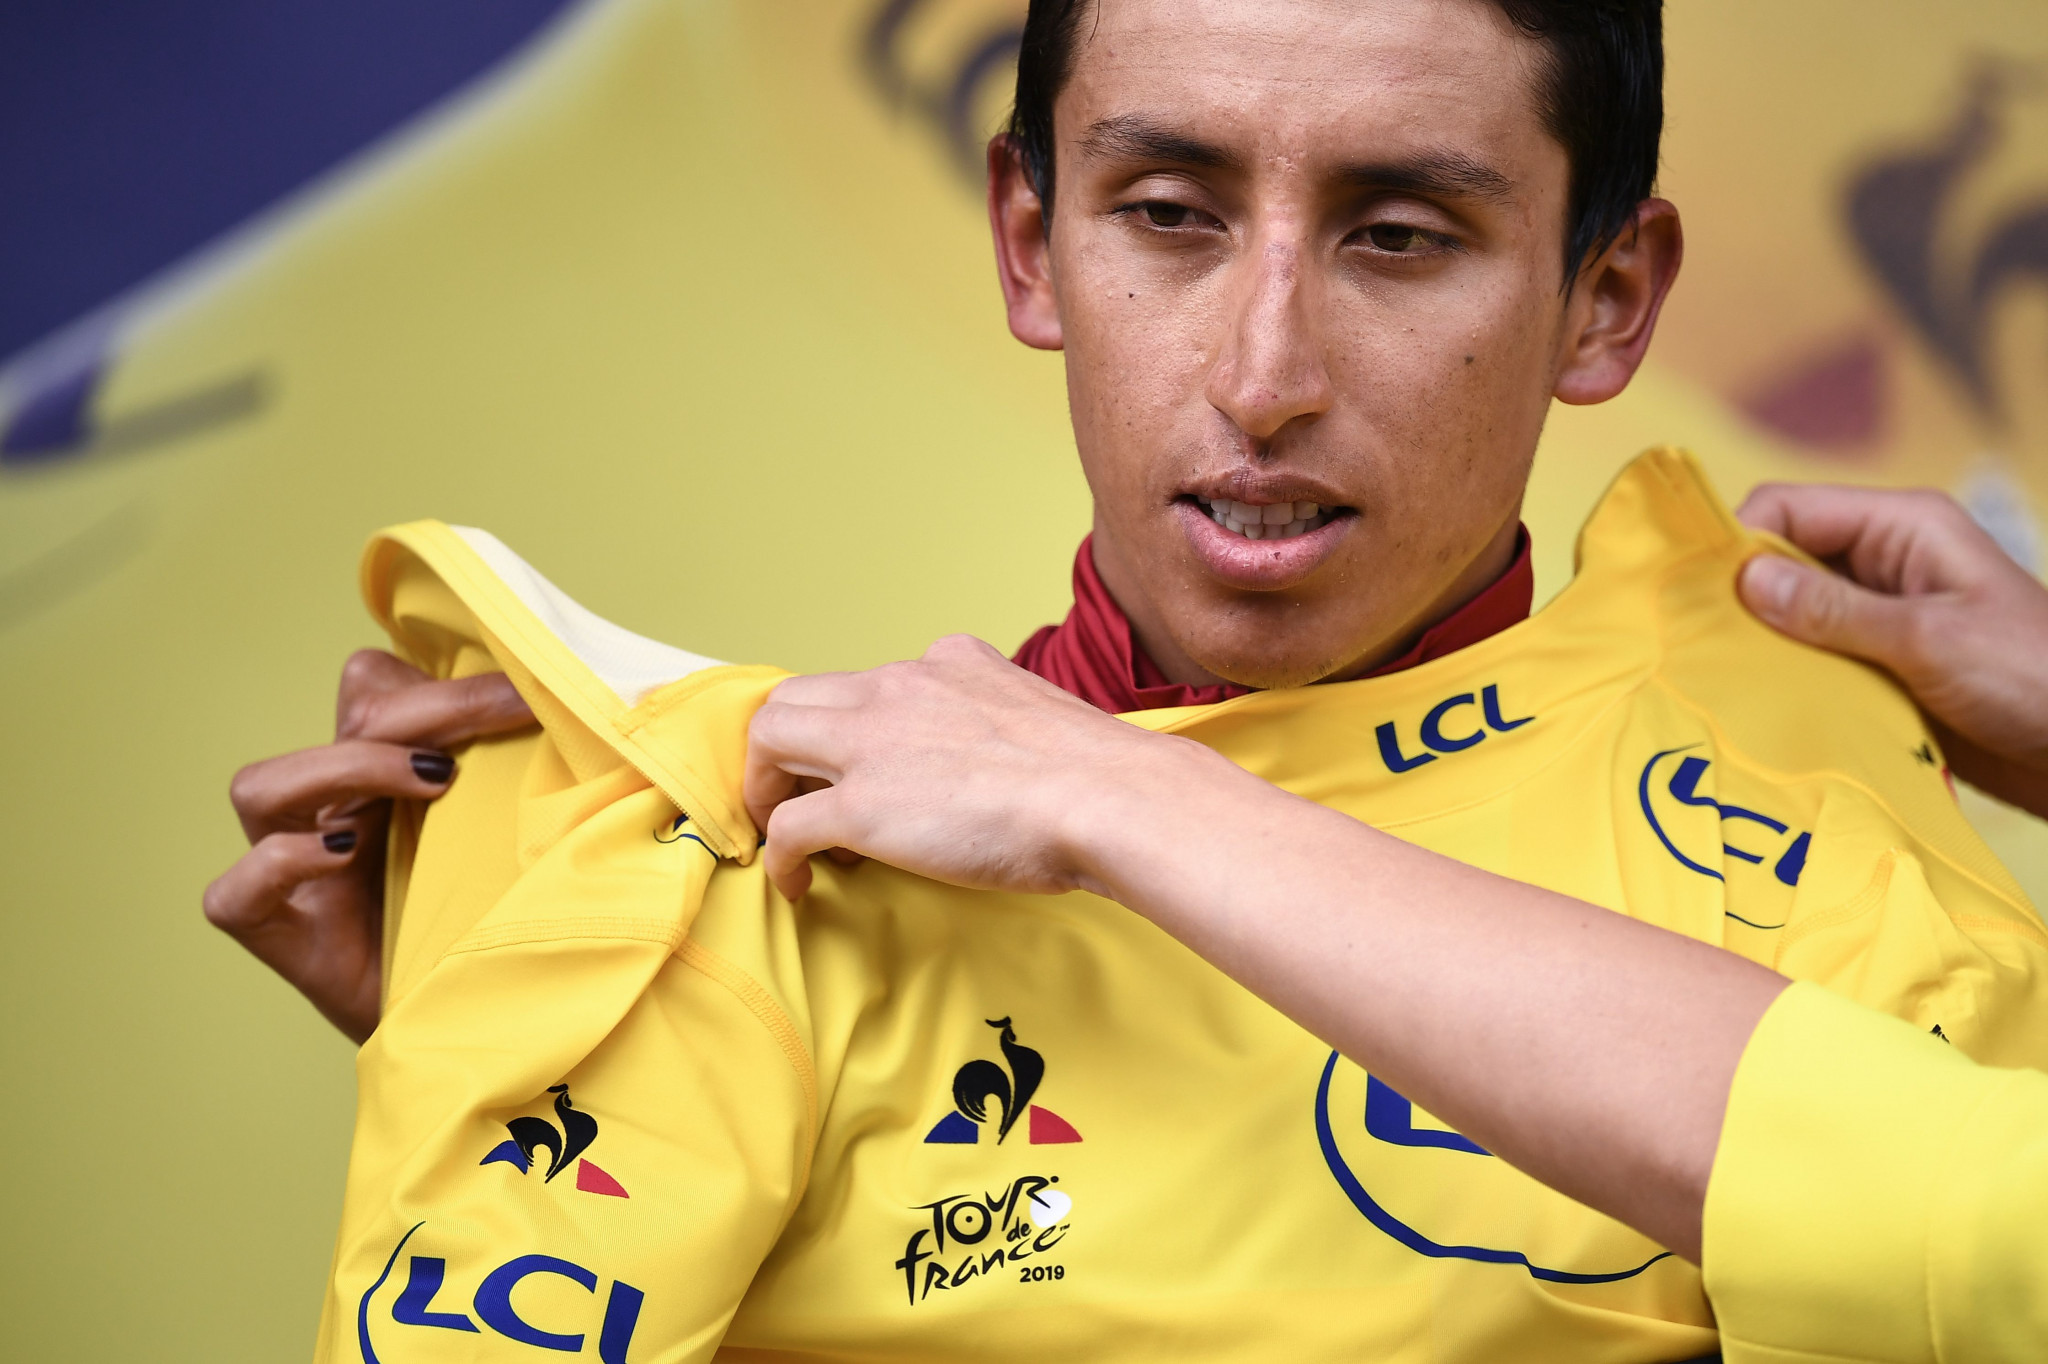 Le Coq Sportif, supplier of the famous Tour de France yellow jersey since 2012, claim that 67 per cent of the French public want to kit out at the national team at Paris 2024 ©Getty Images